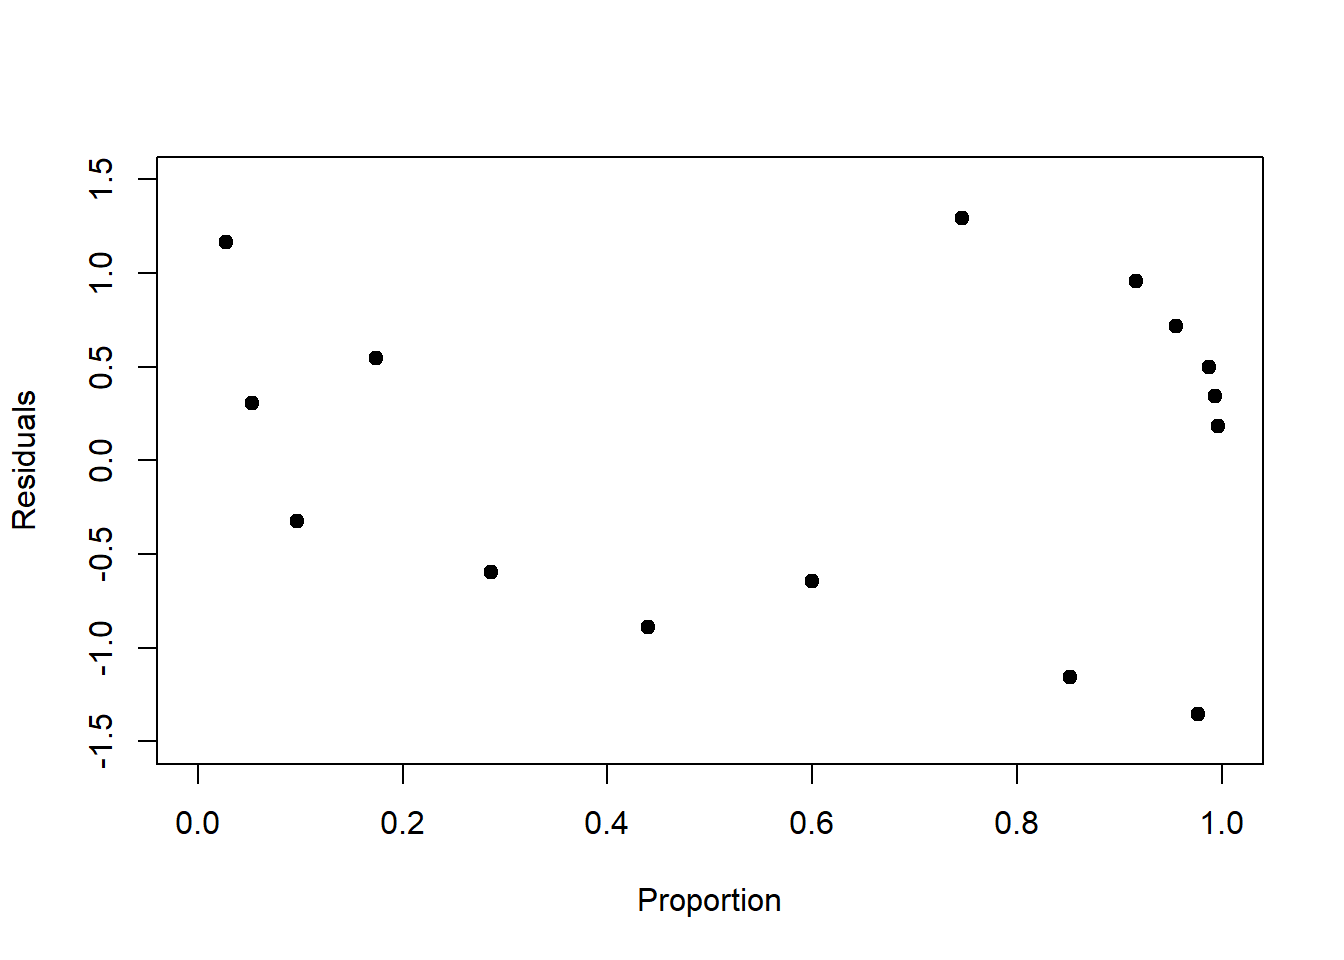 Left: Pearson residuals of the log-linear model fit to the birds data. Compared to Figure \@ref(fig:rawres), left, the increase in residual variance with increasing mean response is dampened. Right: Pearson residuals of the logistic model fit to the survival data. Compared to Figure \@ref(fig:rawres), right, the peak in residual variance at 0.5 is attenuated.